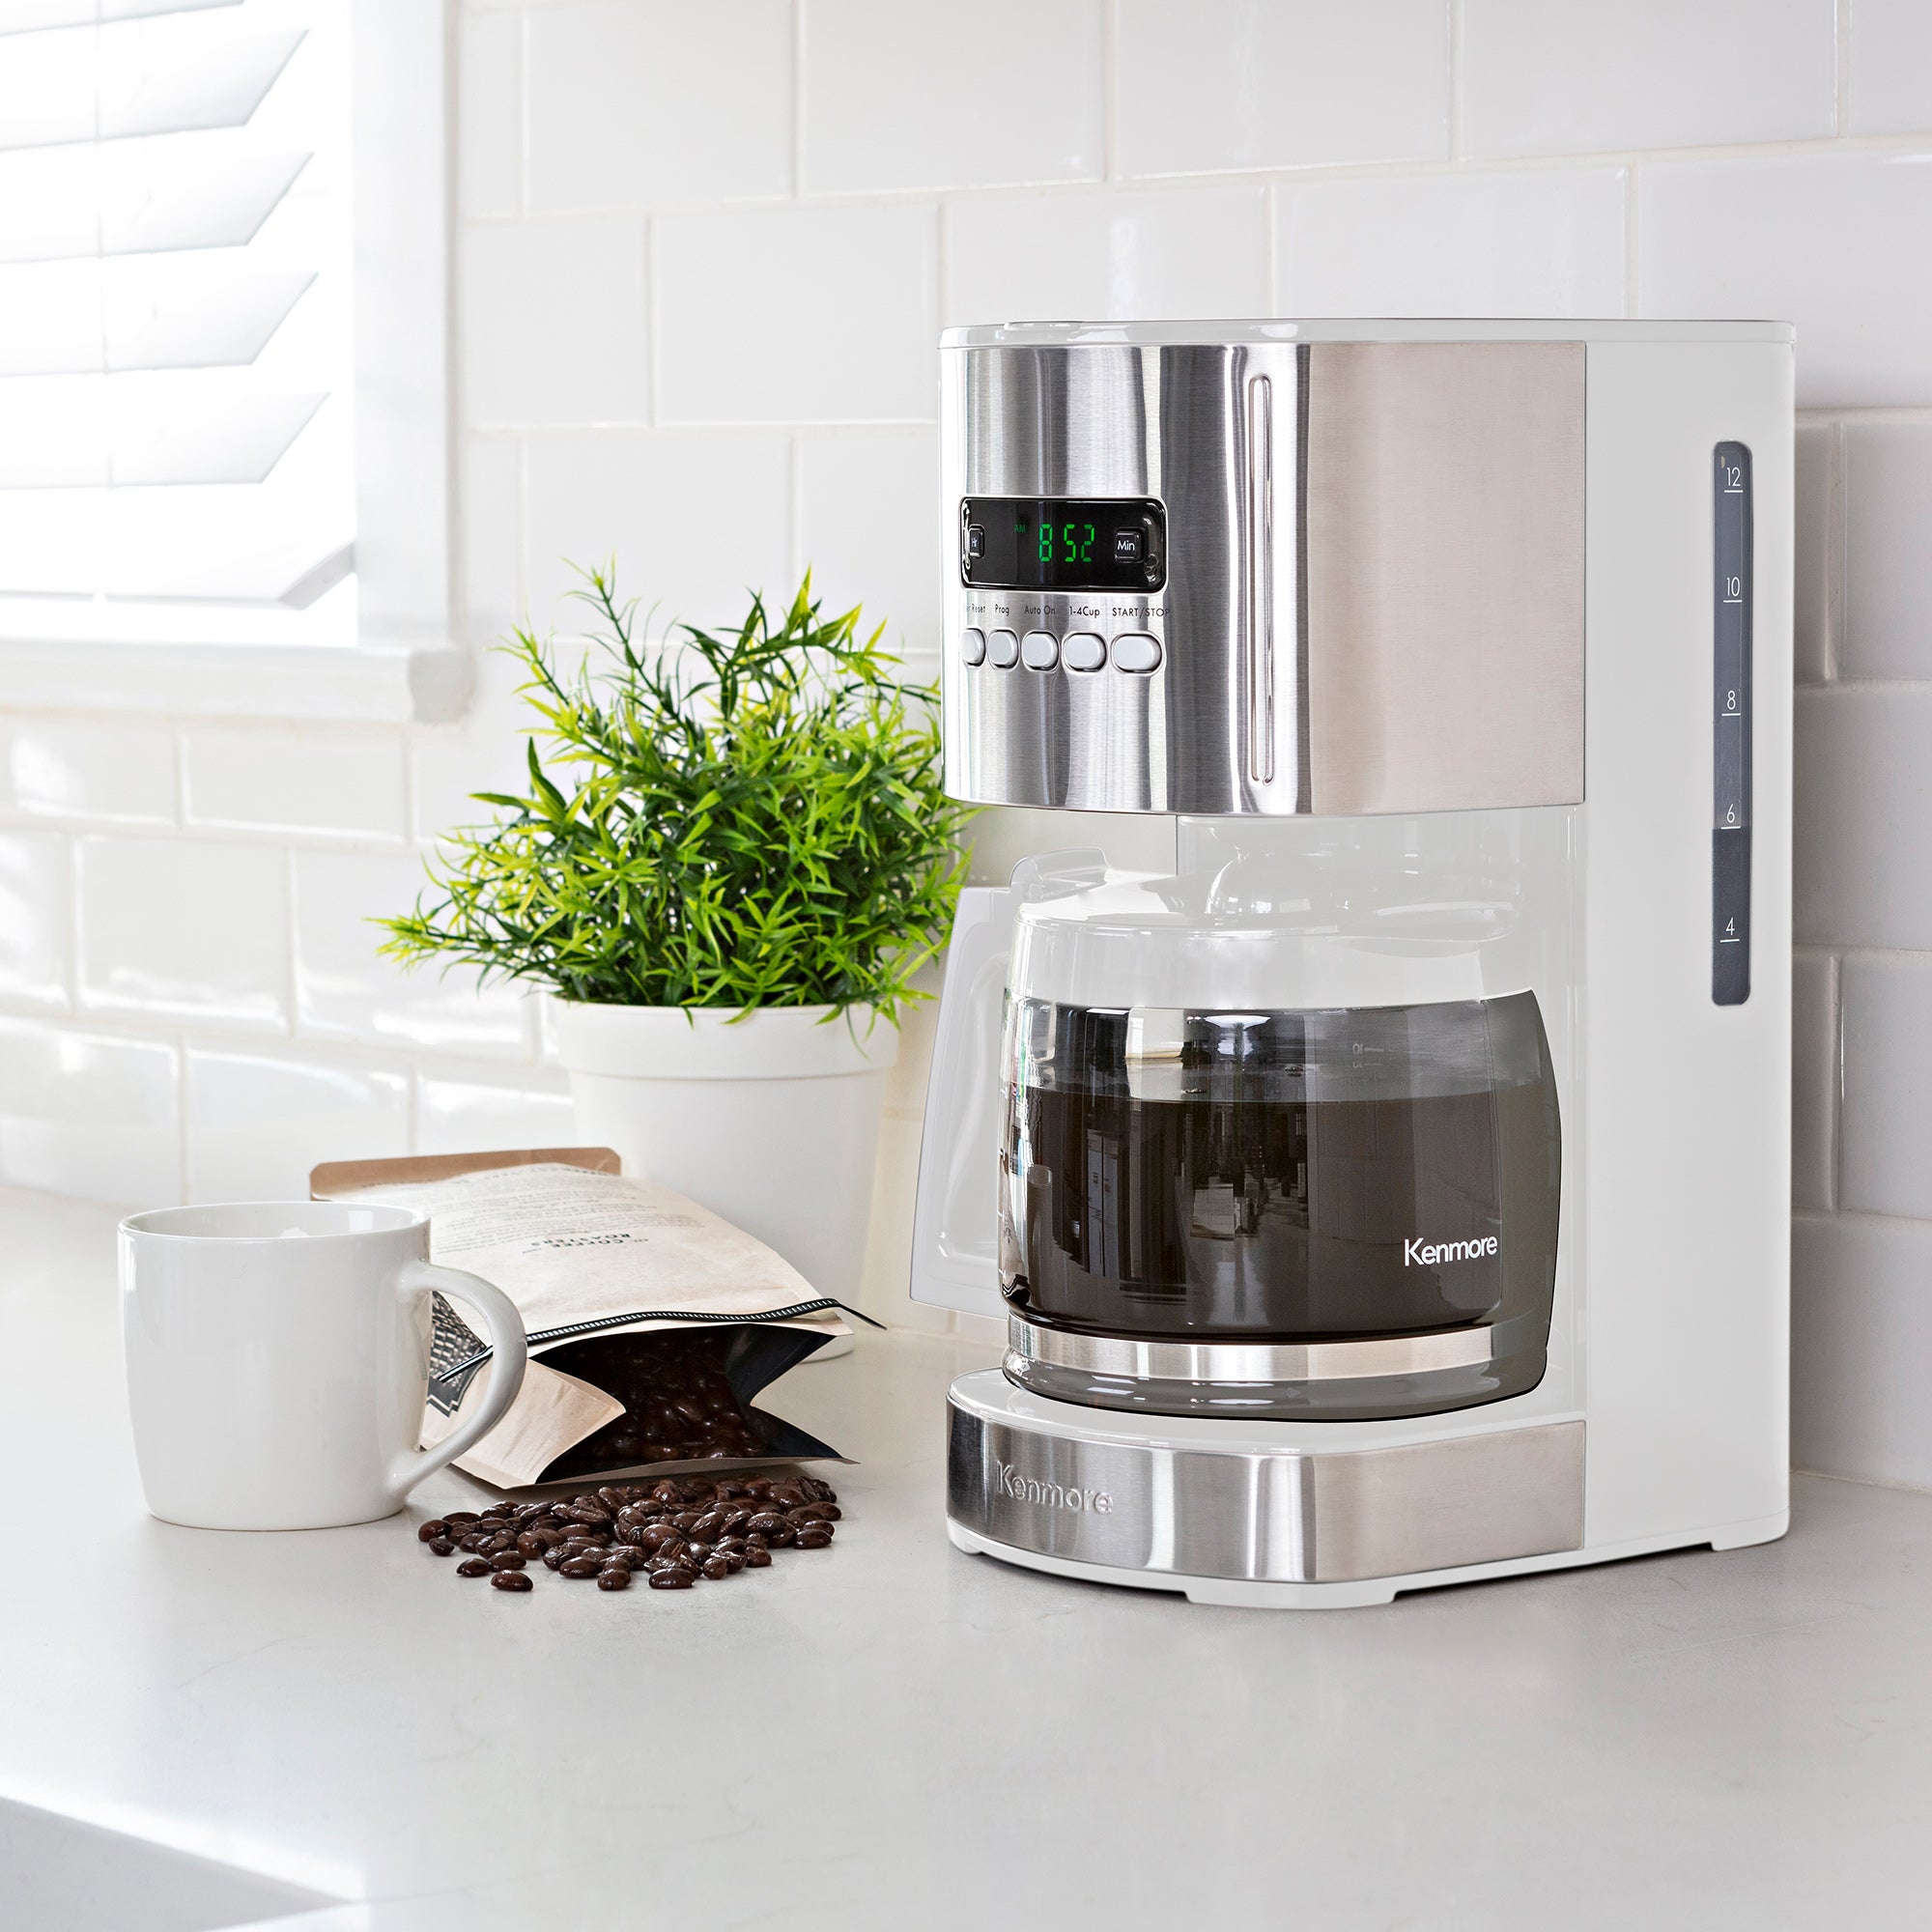 Kenmore 12 cup coffee maker, white ona white kitchen counter besides a coffee mug, coffee beans and a small plant